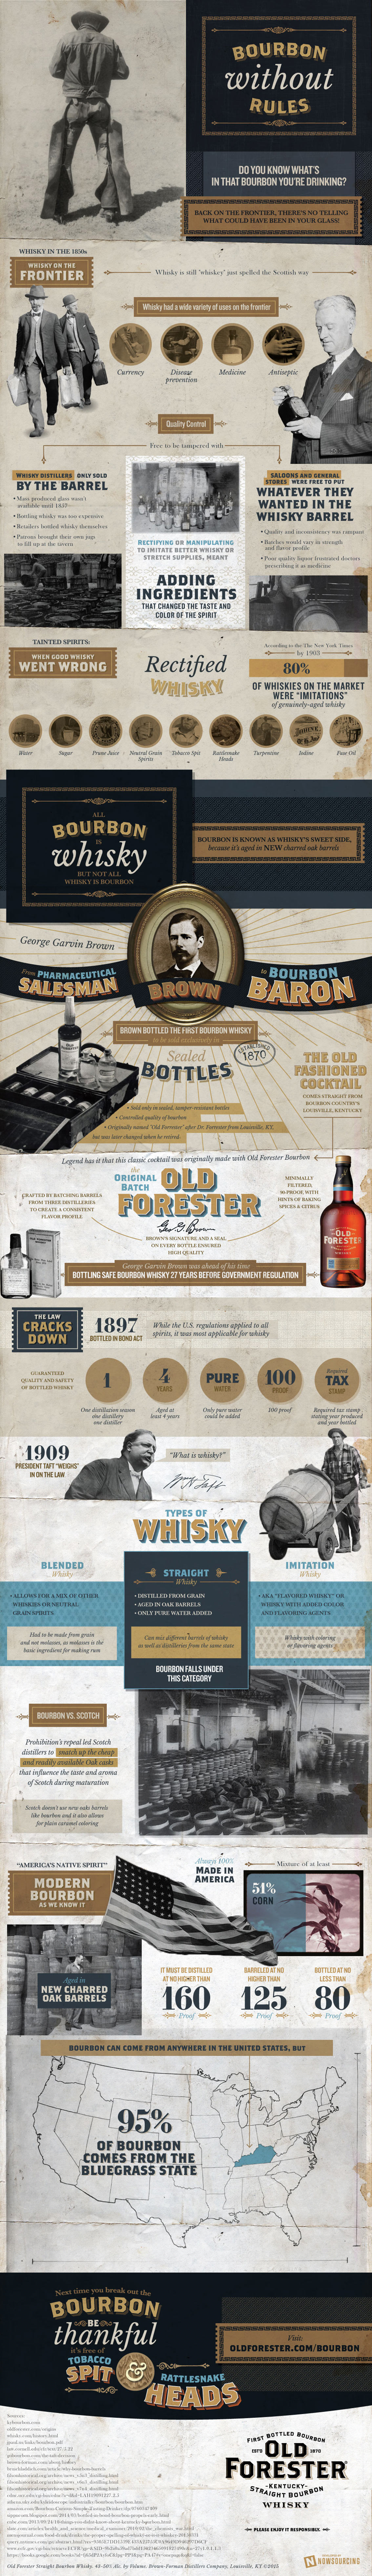 Where does Bourbon Come From - Whiskey History Infographic